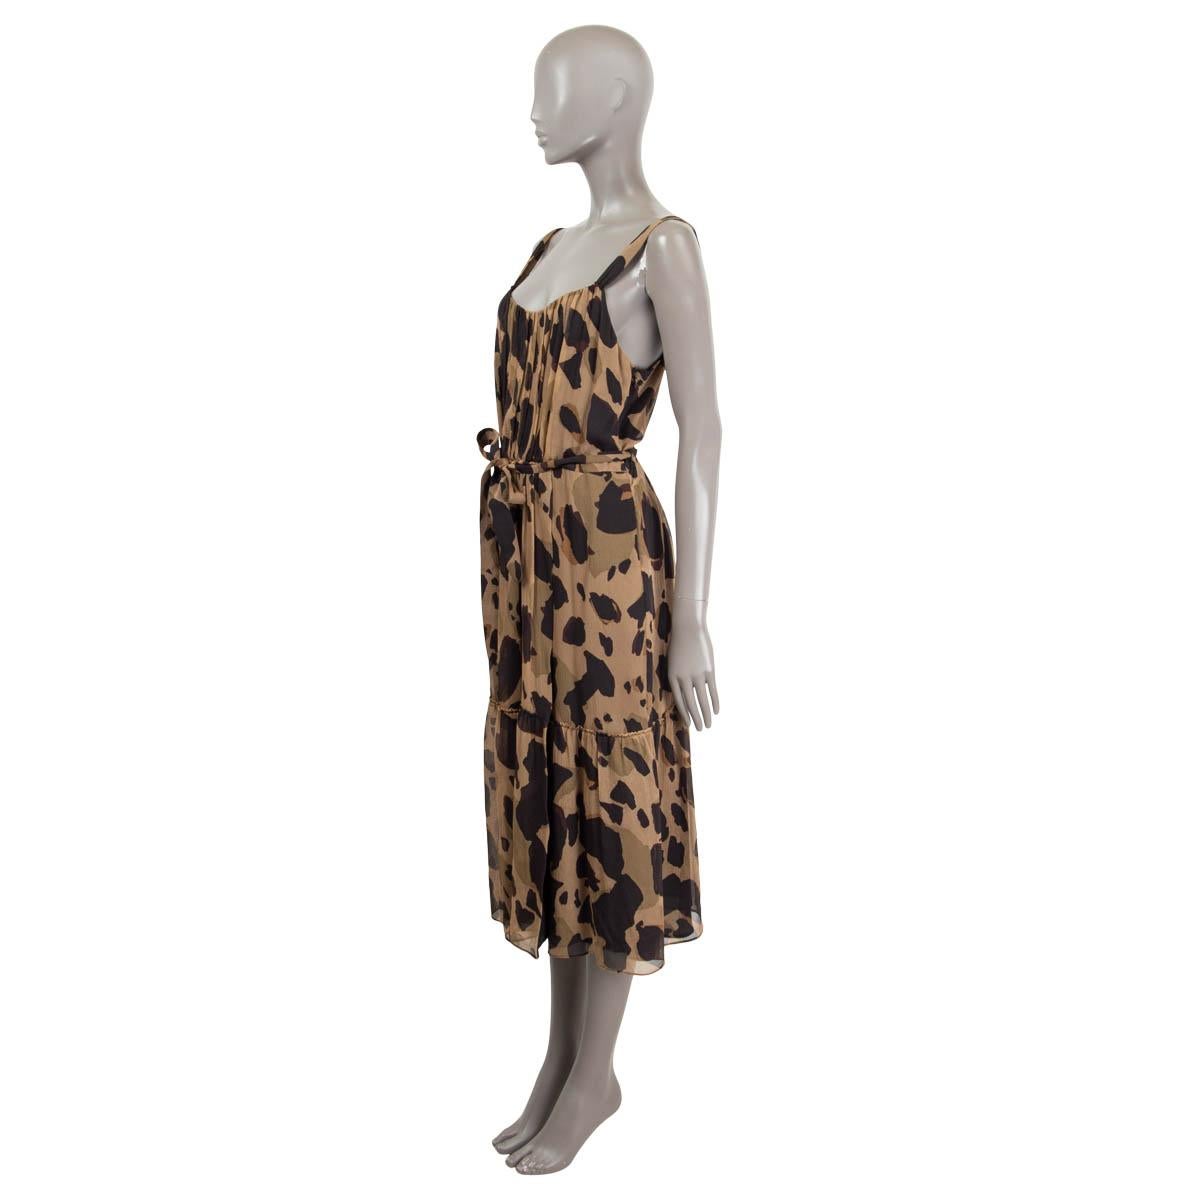 100% authentic Burberry Darcie camouflage dress in olive green, brown and black silk (100%). Double lined in black silk. Features a silk belt in similar pattern, thick strap sleeves, a flowy A-line cut and opens with a concealed zipper on the side.